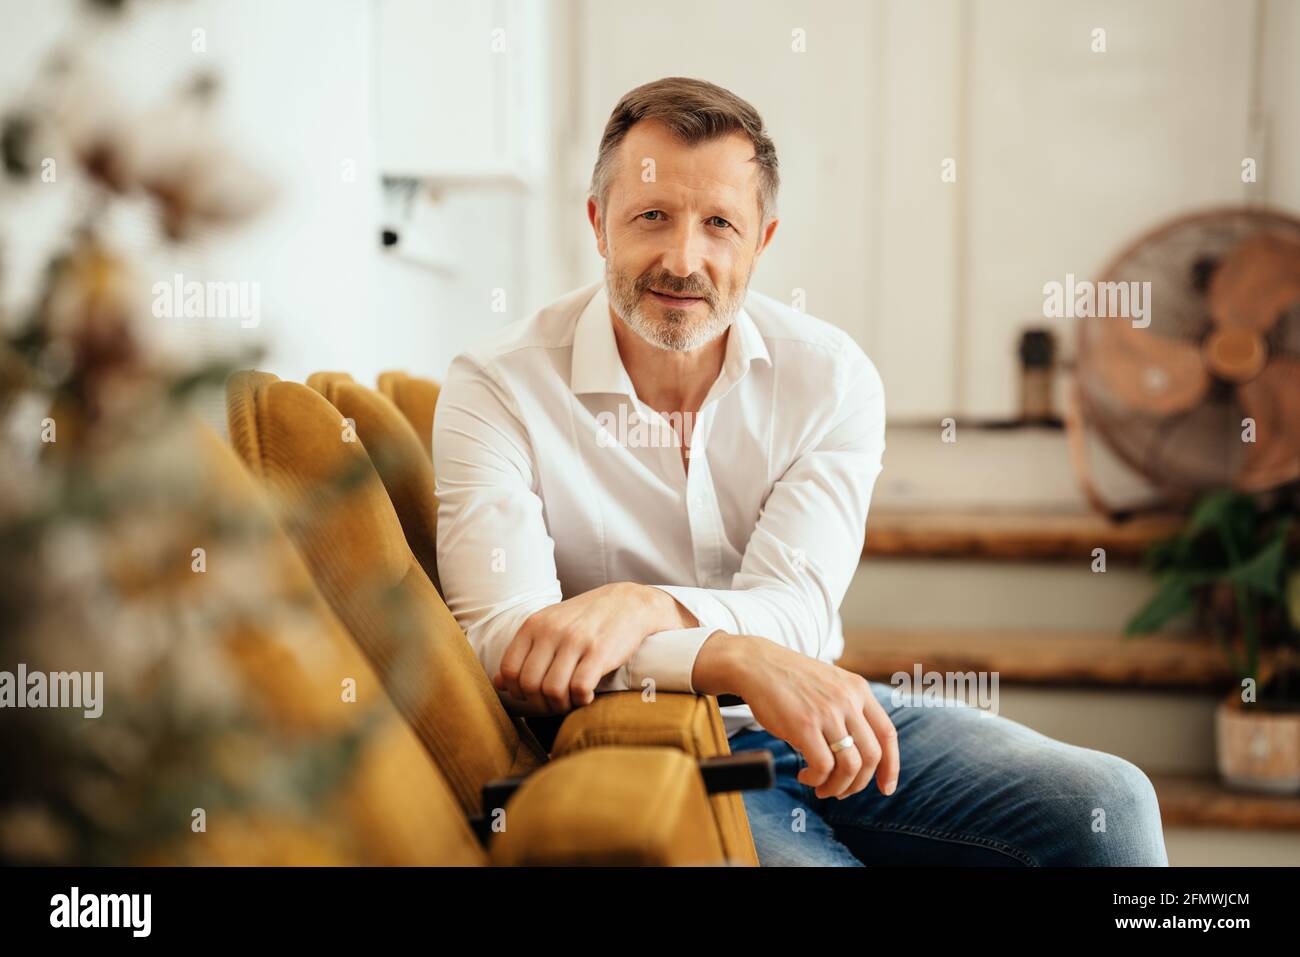 Relaxed casual trendy middle-aged man staring at the camera as he turns to lean on a row of seats against a wall Stock Photo